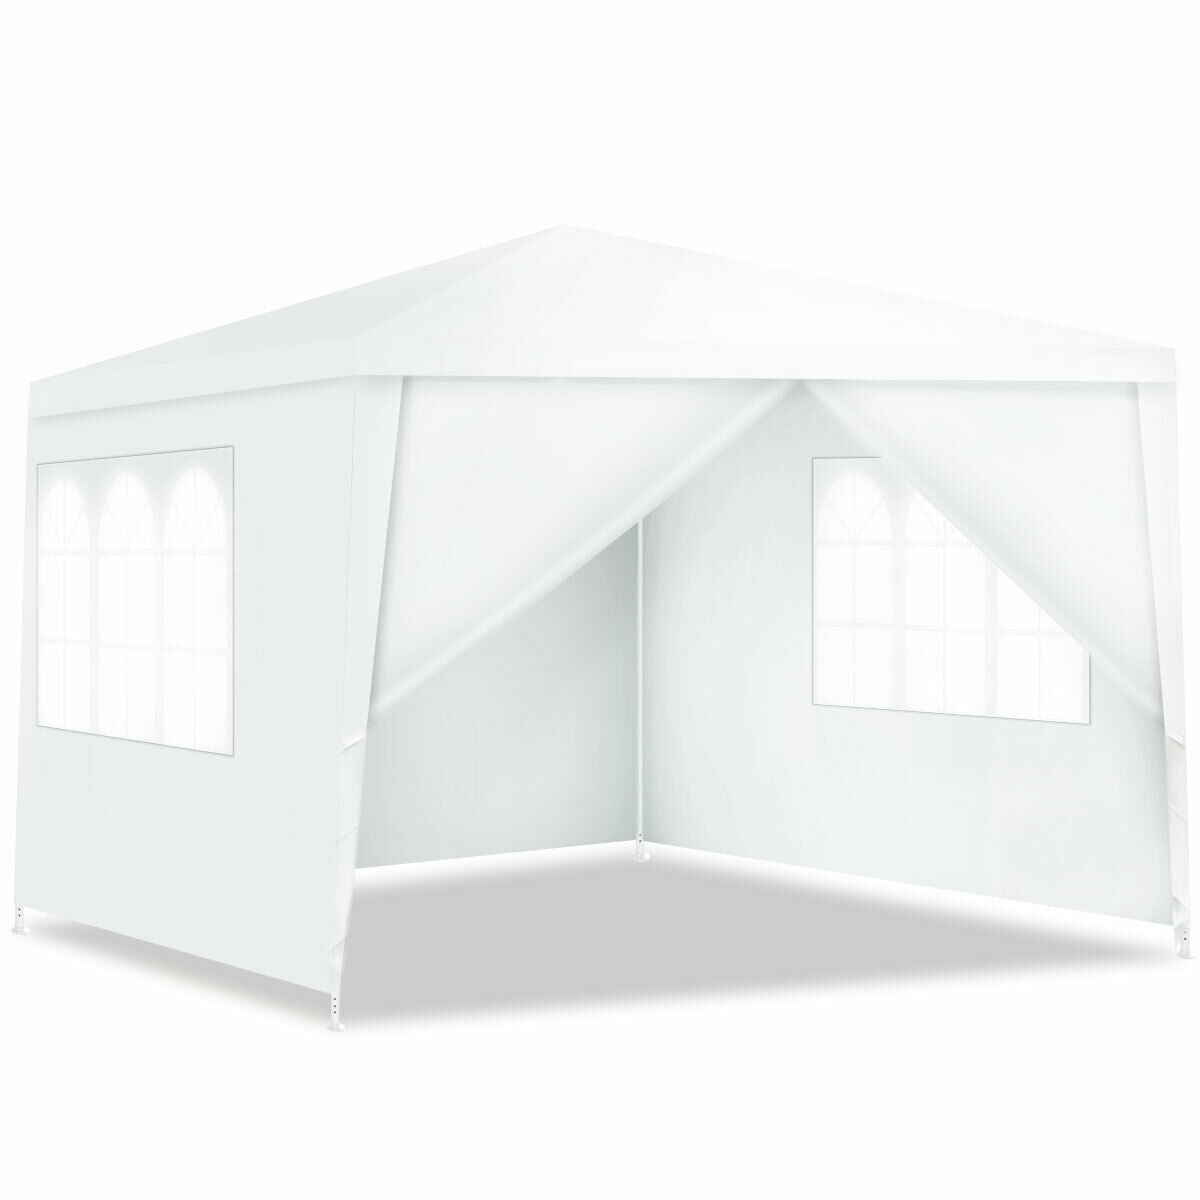 Hikidspace 10 x 10 Feet Outdoor Side Walls Canopy Tent for Patio and Picnic